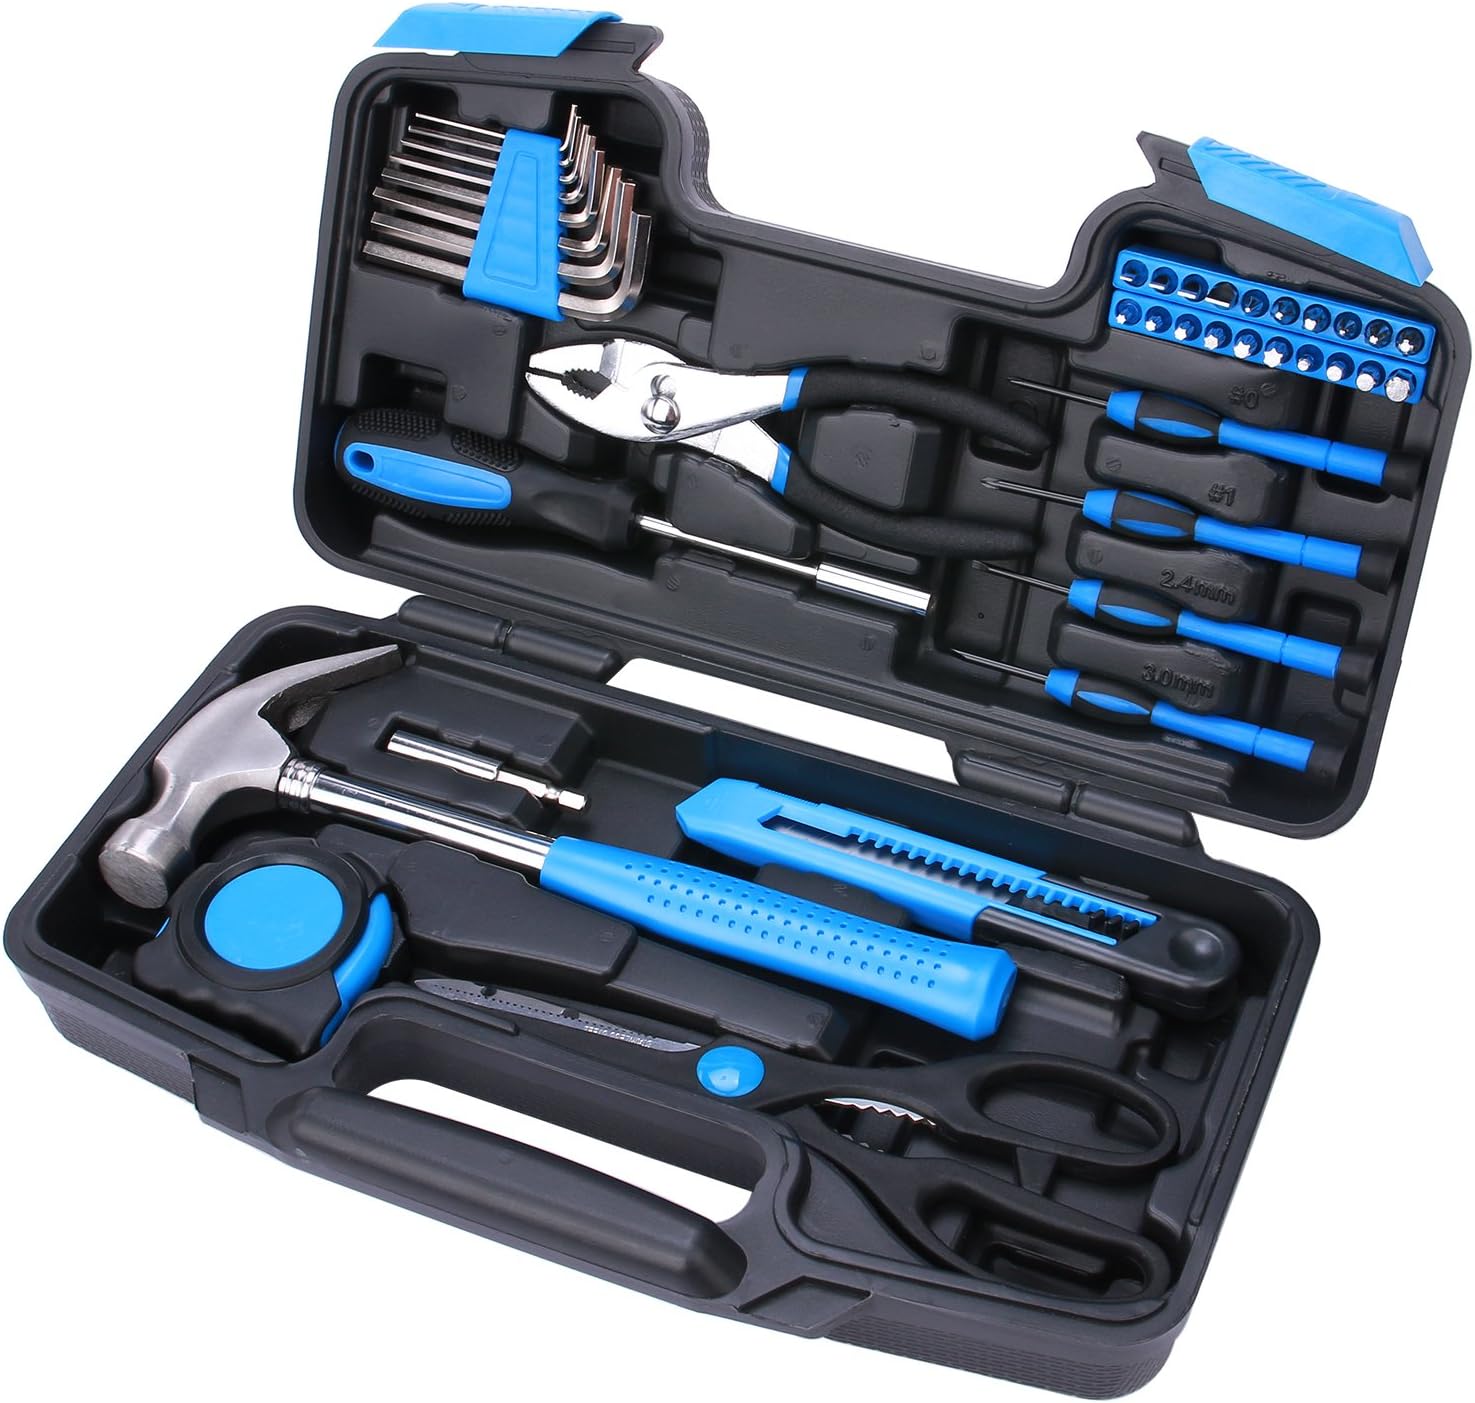 EFFICERE 40-Piece All Purpose Household Tool Kit Review